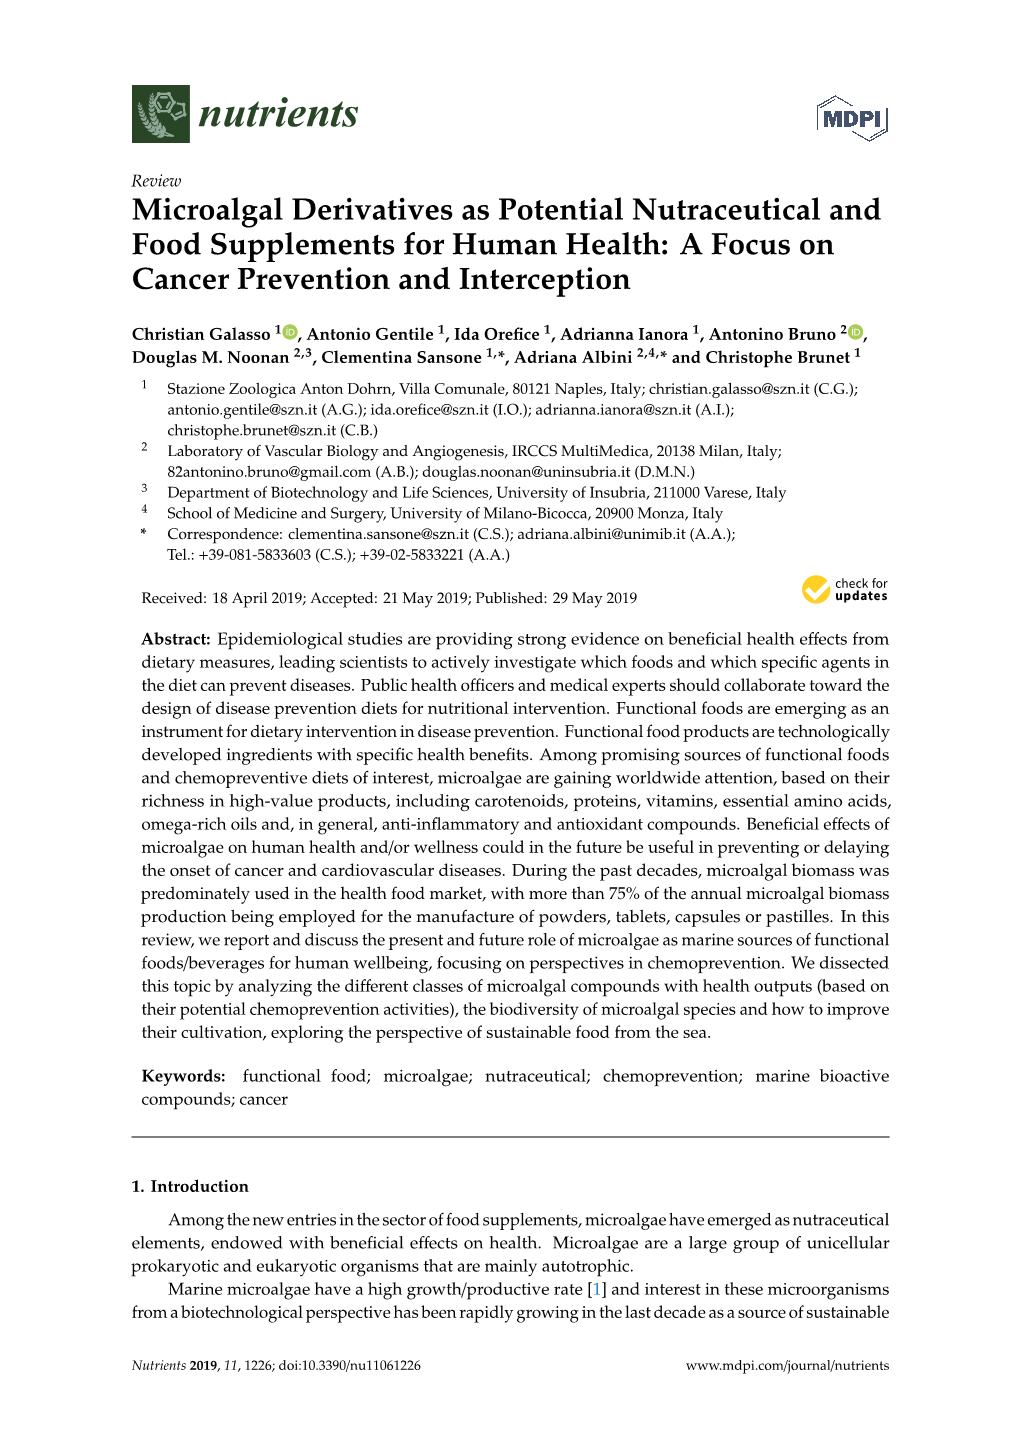 Microalgal Derivatives As Potential Nutraceutical and Food Supplements for Human Health: a Focus on Cancer Prevention and Interception